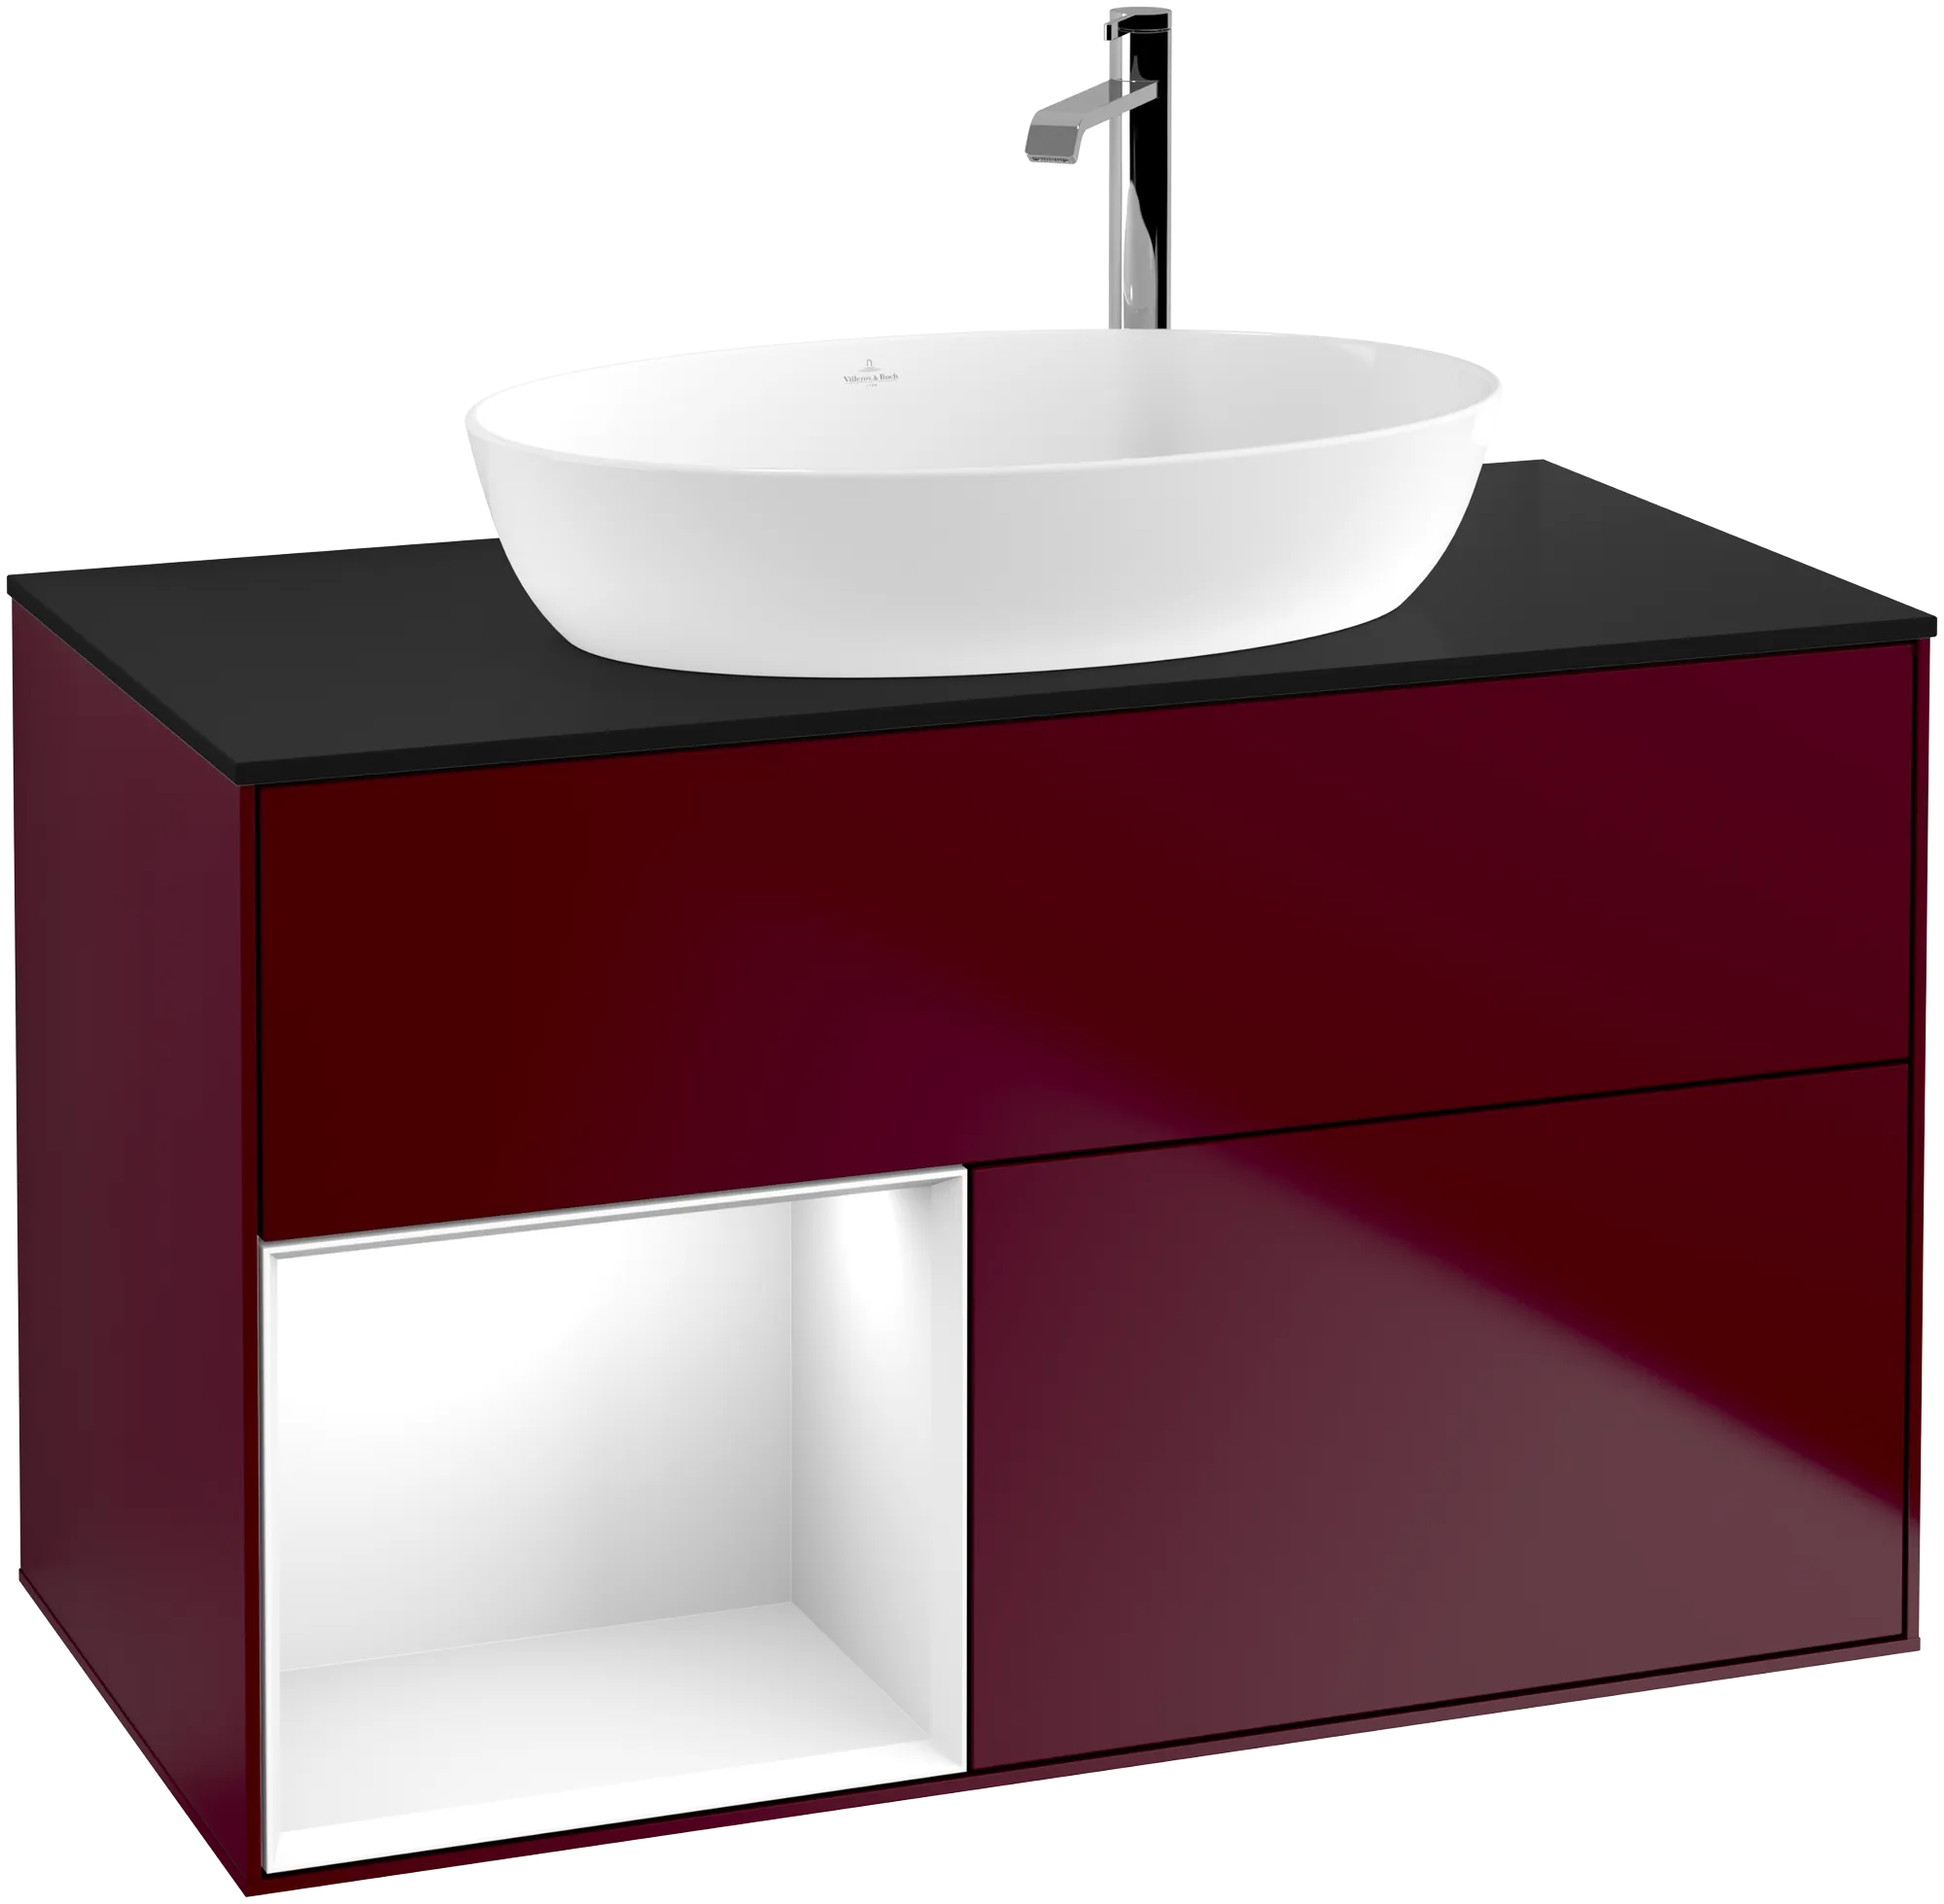 Picture of VILLEROY BOCH Finion Vanity unit, with lighting, 2 pull-out compartments, 1000 x 603 x 501 mm, Peony Matt Lacquer / Glossy White Lacquer / Glass Black Matt #G892GFHB